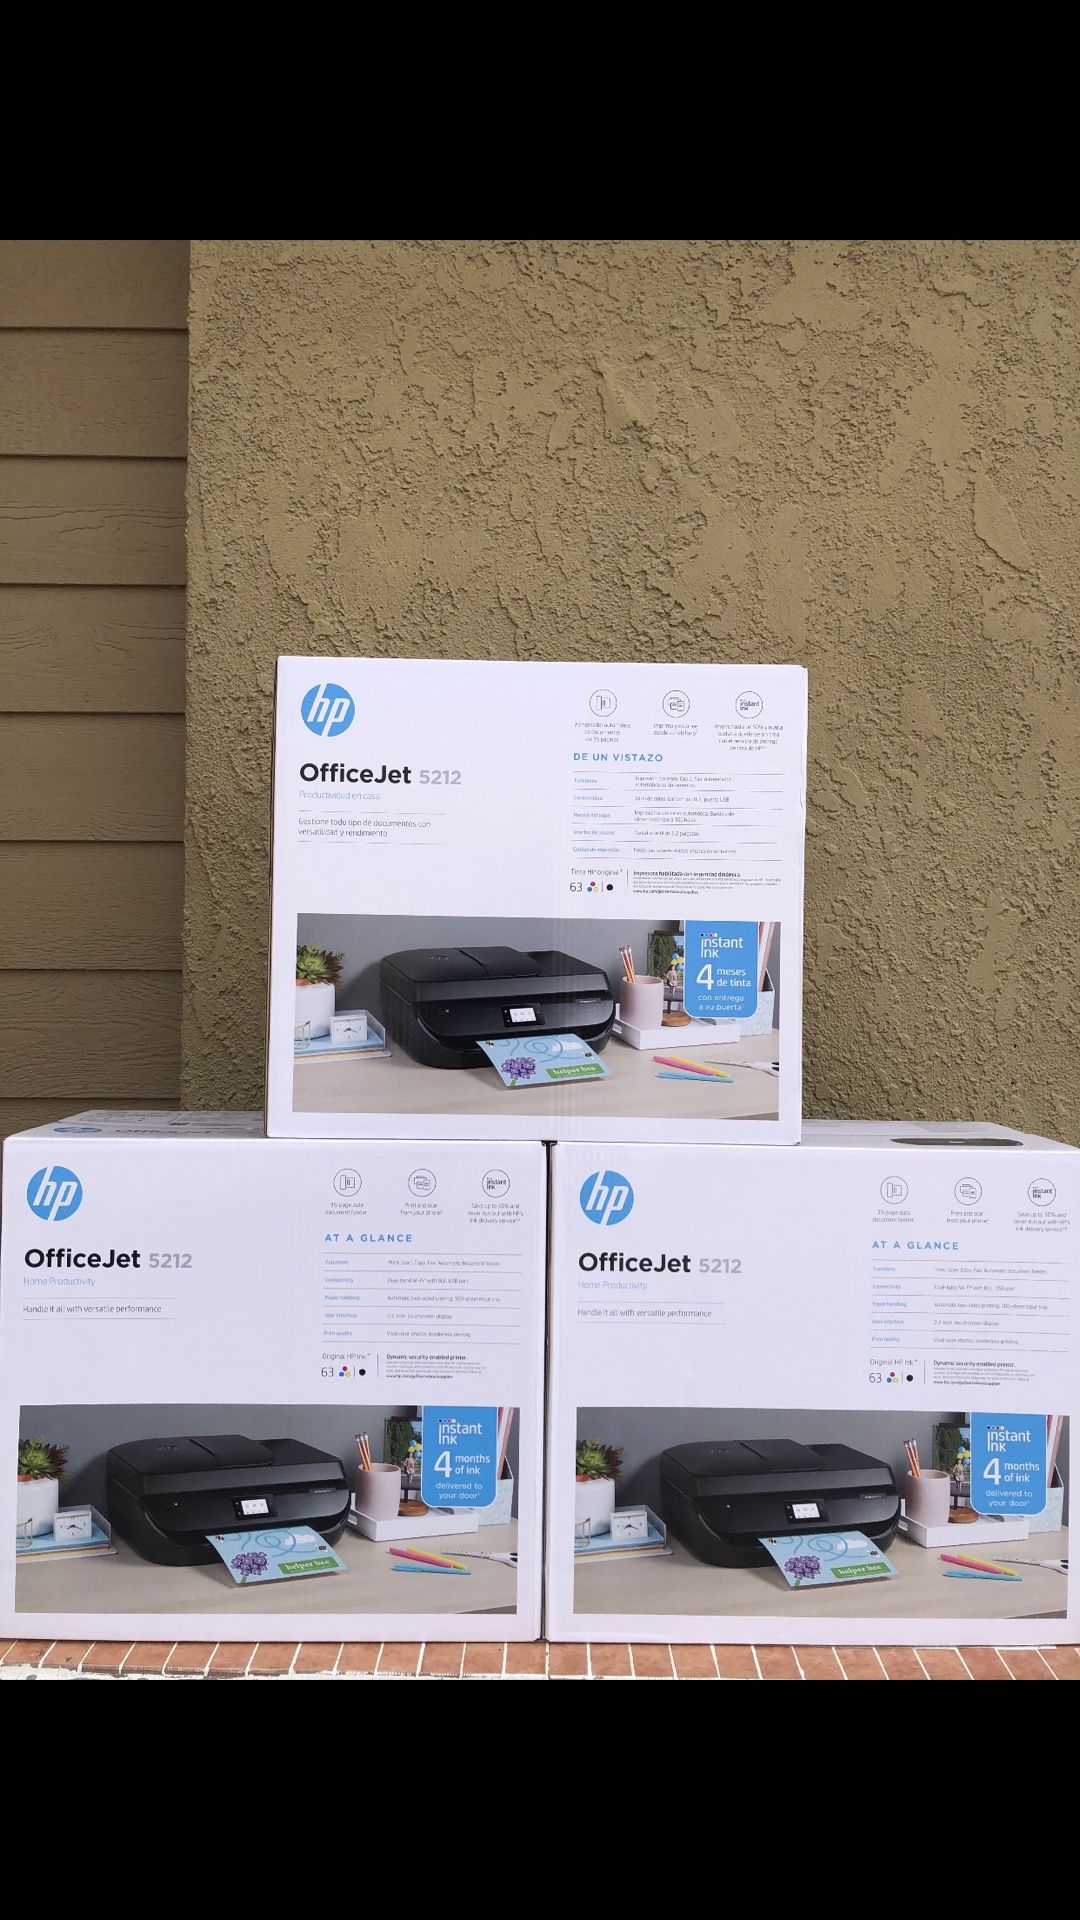 BRAND NEW SEALED OFFICE 5212 JET ALL-IN ONE WIRELESS COLOR INKJET PRINTER-INTANT INK READY FRIM $100 EACH